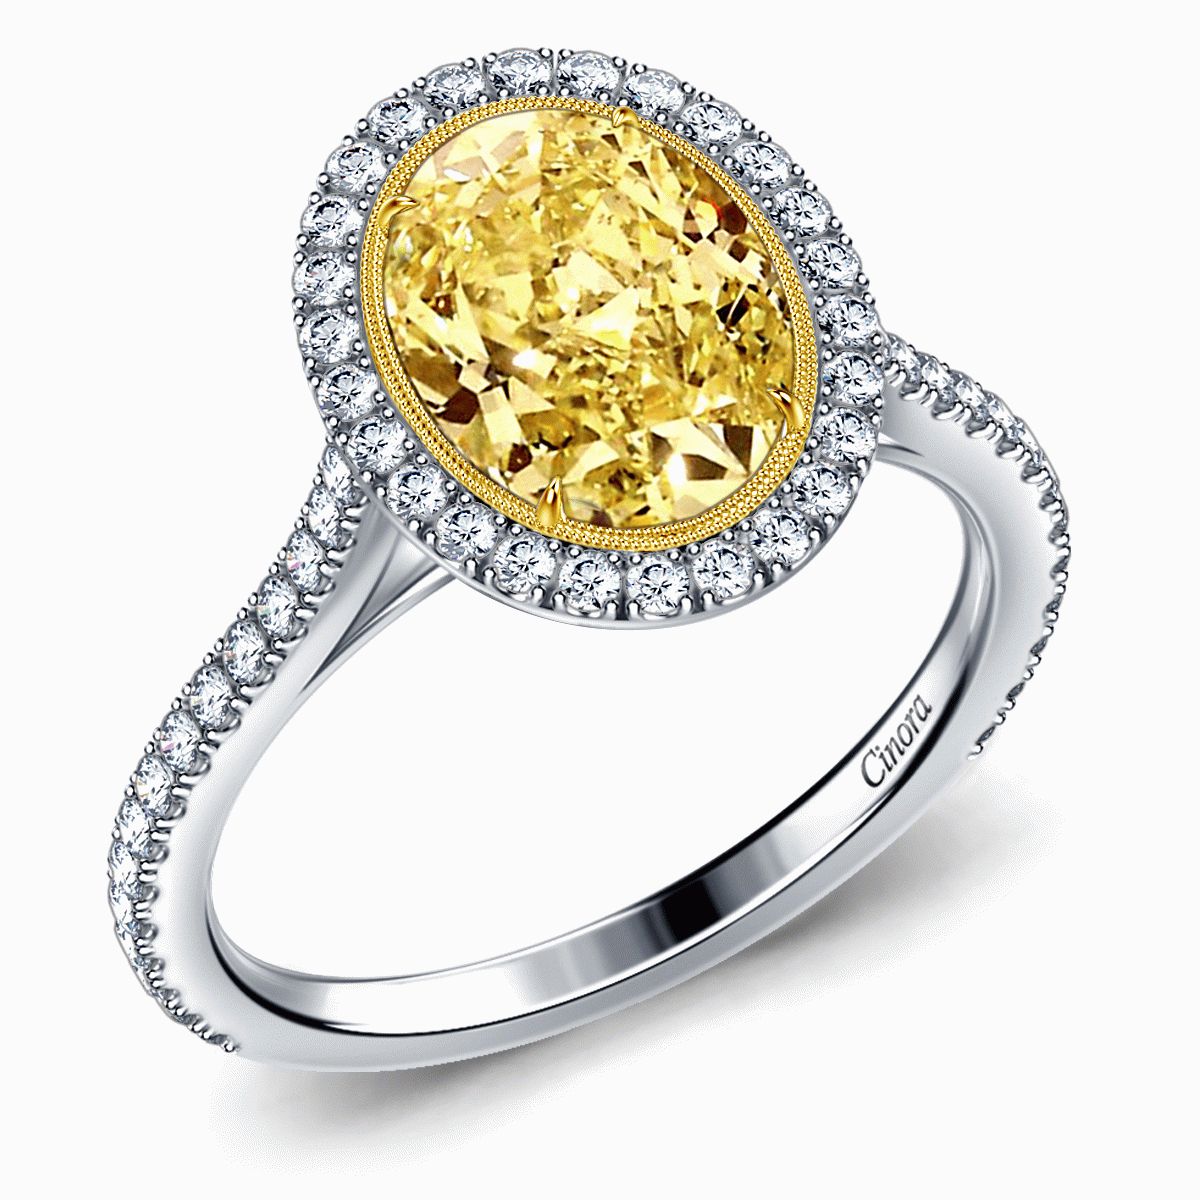 Fancy Oval Cut Yellow Diamond Cathedral Engagement Ring In Throughout Oval Shaped Yellow Diamond Rings (View 4 of 25)